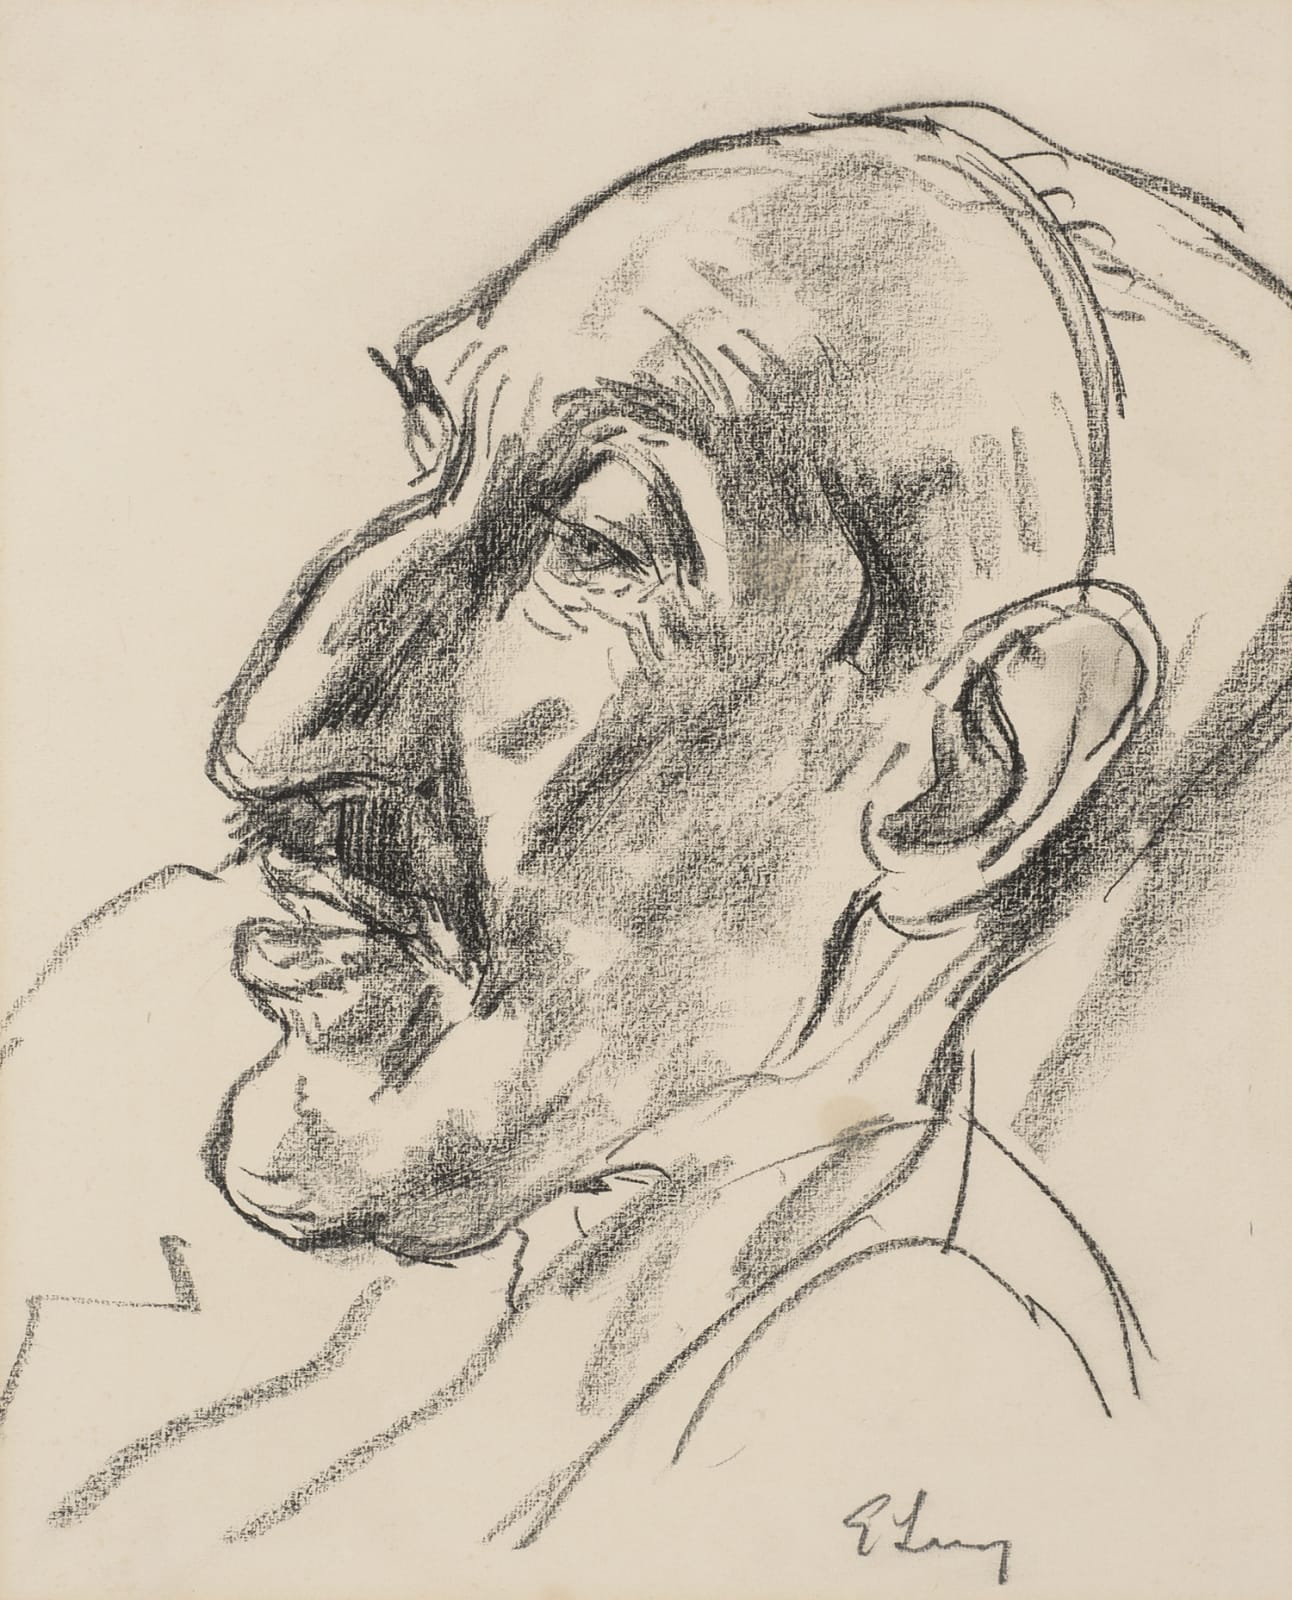 Emmanuel Levy (1900-1986) Portrait of Horace Brodzky n.d. Pencil 38.4 x 30.5 cm Ben Uri Collection © Emmanuel Levy estate To see and discover more about this artist click here